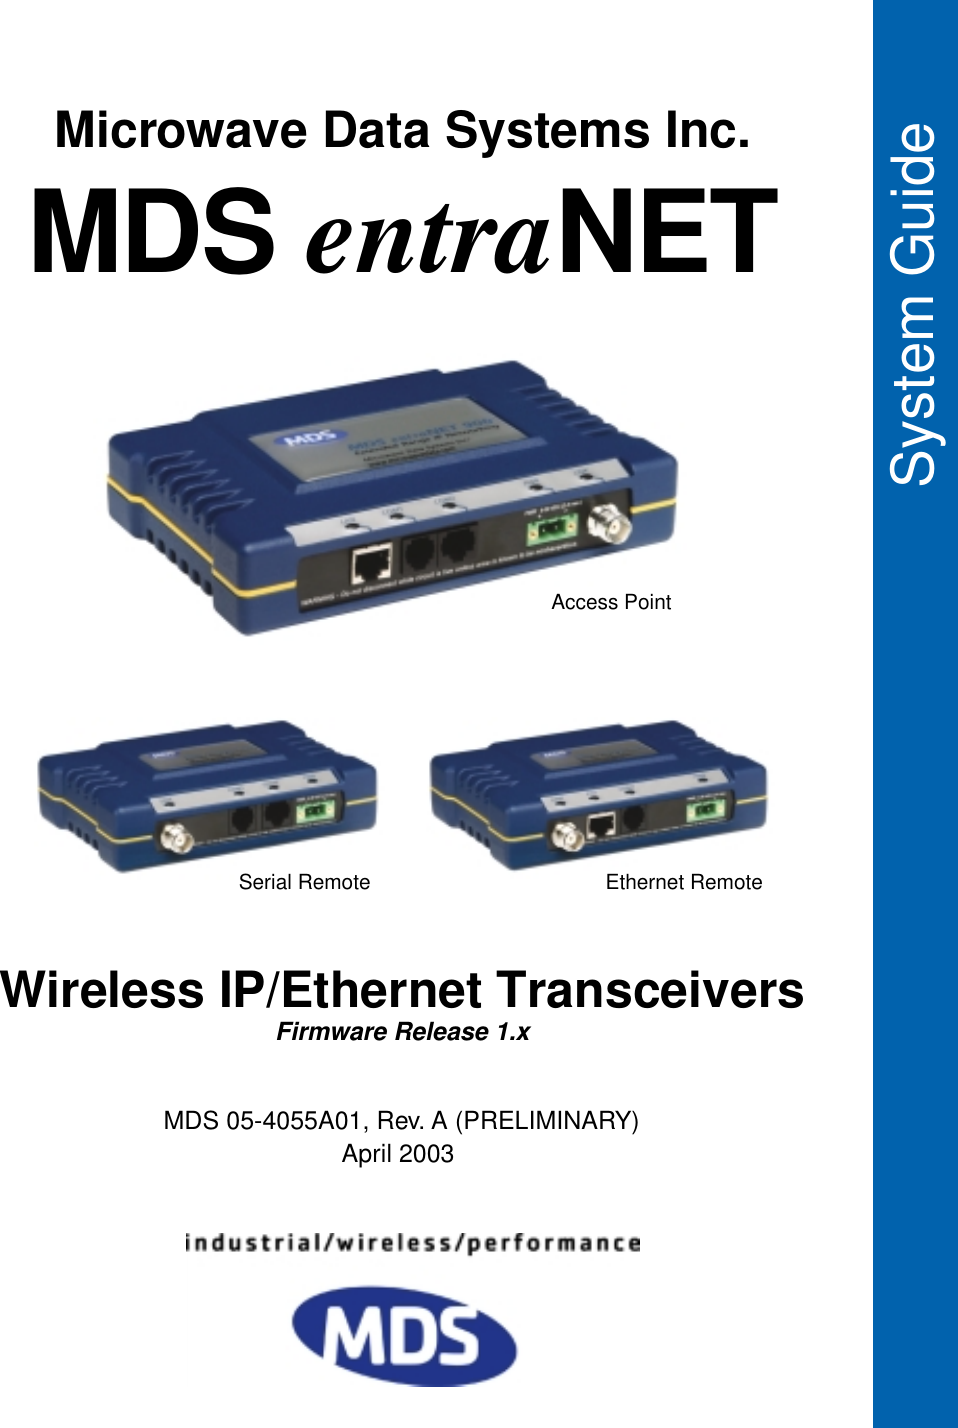  System GuideWireless IP/Ethernet TransceiversFirmware Release 1.xMDS entraNET Microwave Data Systems Inc. Access PointSerial Remote Ethernet Remote  MDS 05-4055A01, Rev. A (PRELIMINARY)April 2003